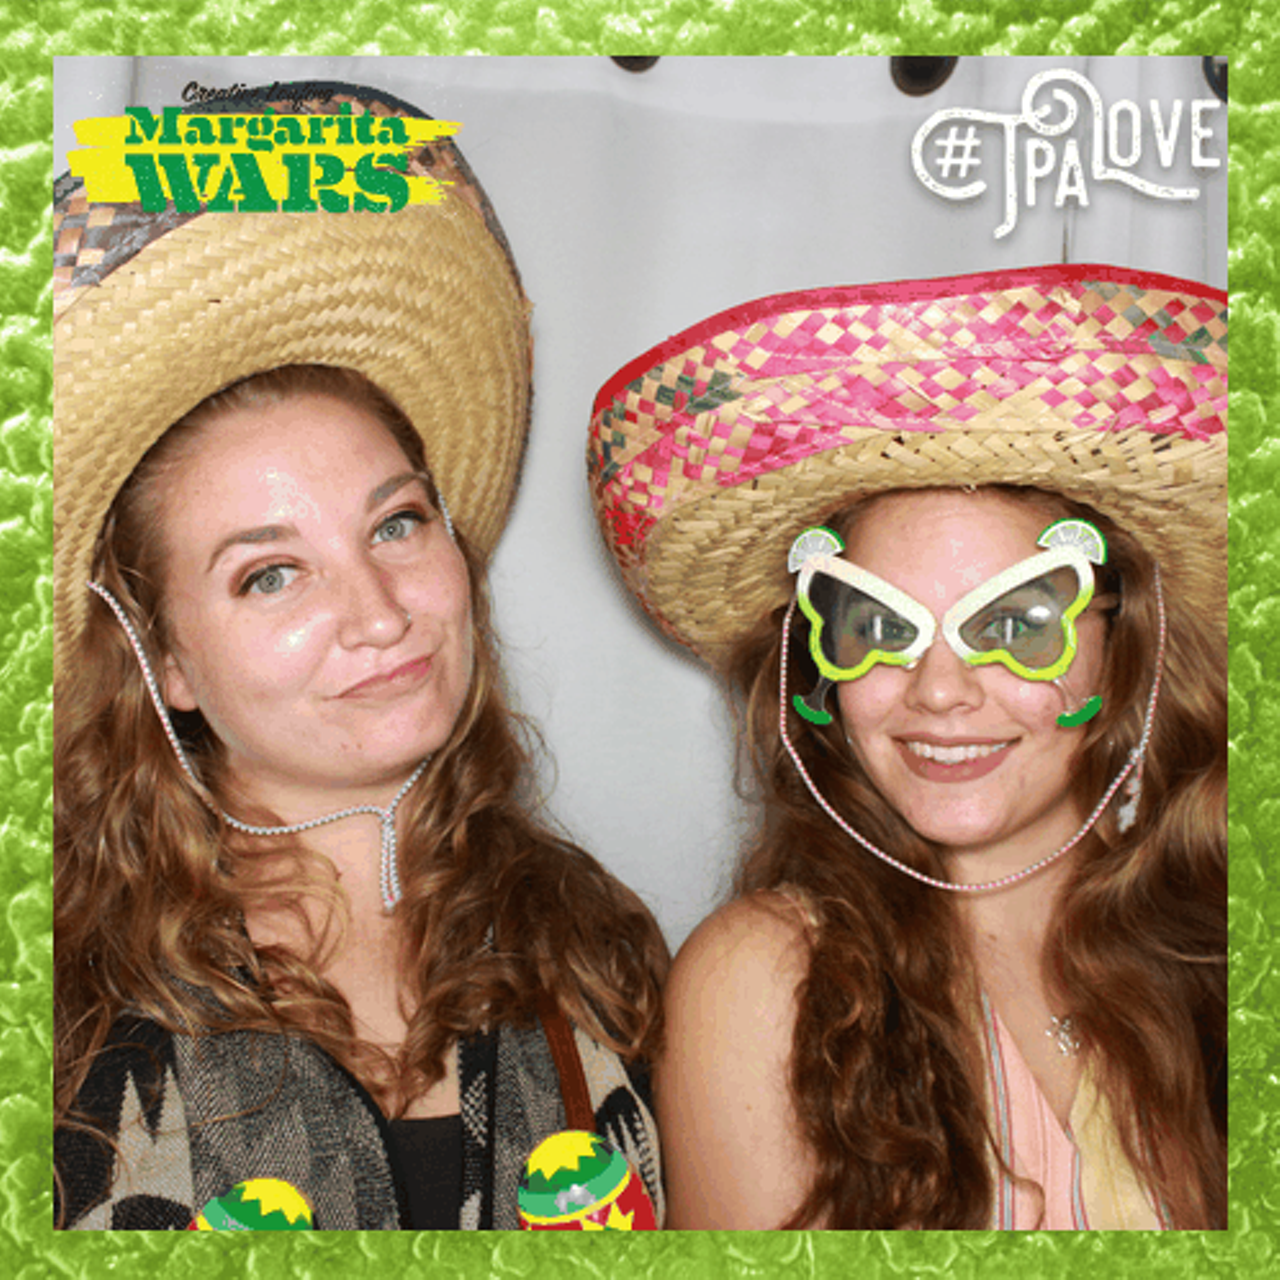 Grab your bestie and get festive in Premier Photo Booths of Florida's complimentary photo booth.